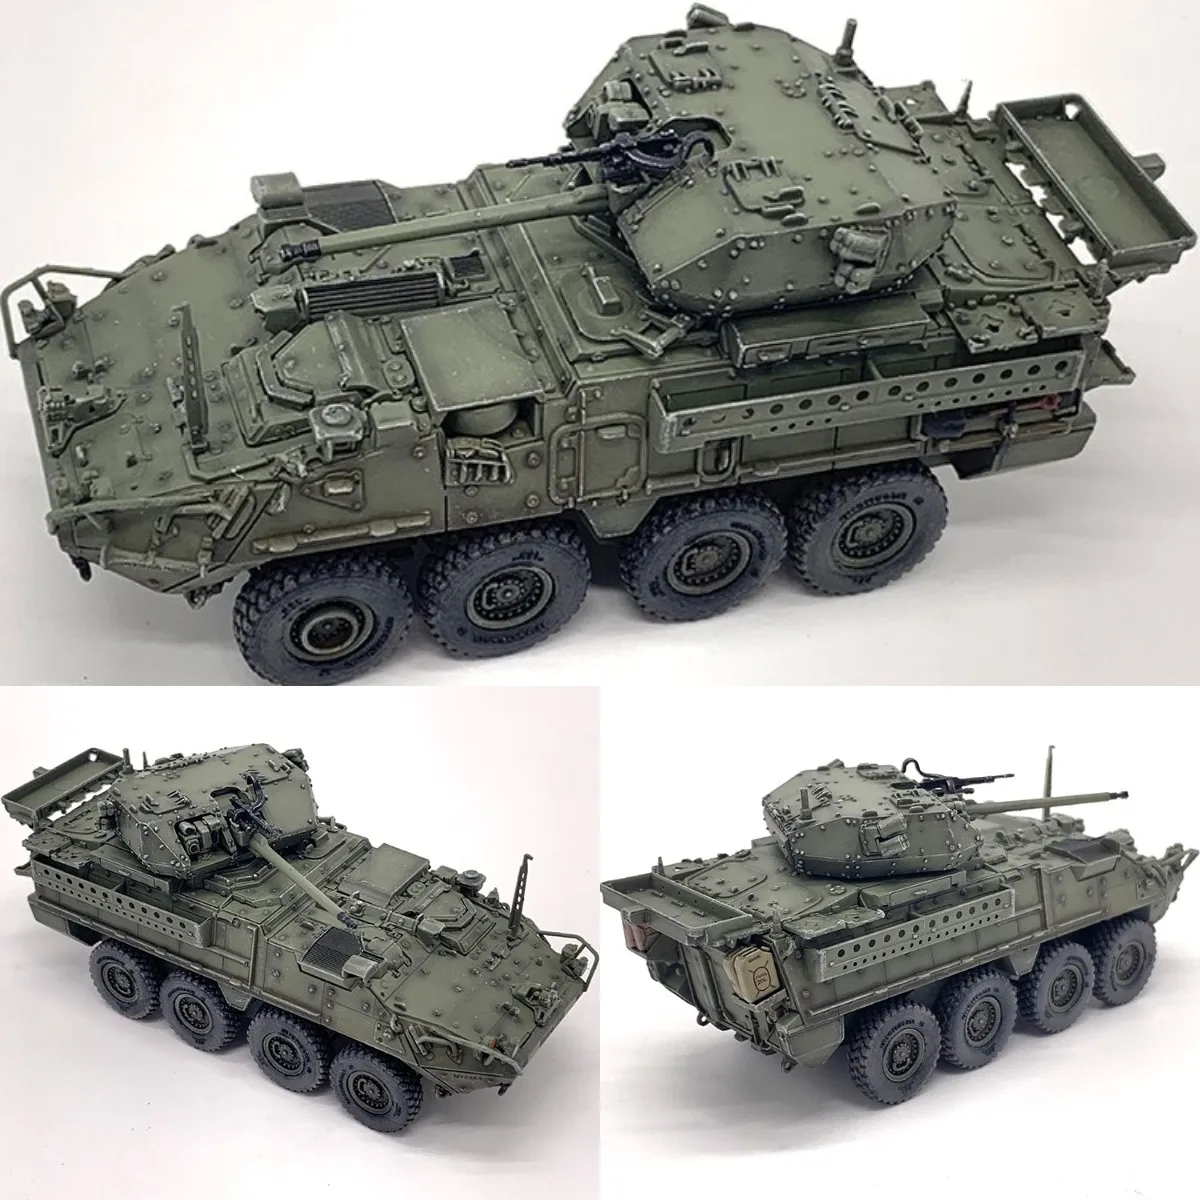 

ARTISAN 1/72 American Stryker Infantry Fighting Vehicle M1296 Dragoon Armored Vehicle Military Toy Boys' Gift Finished Model